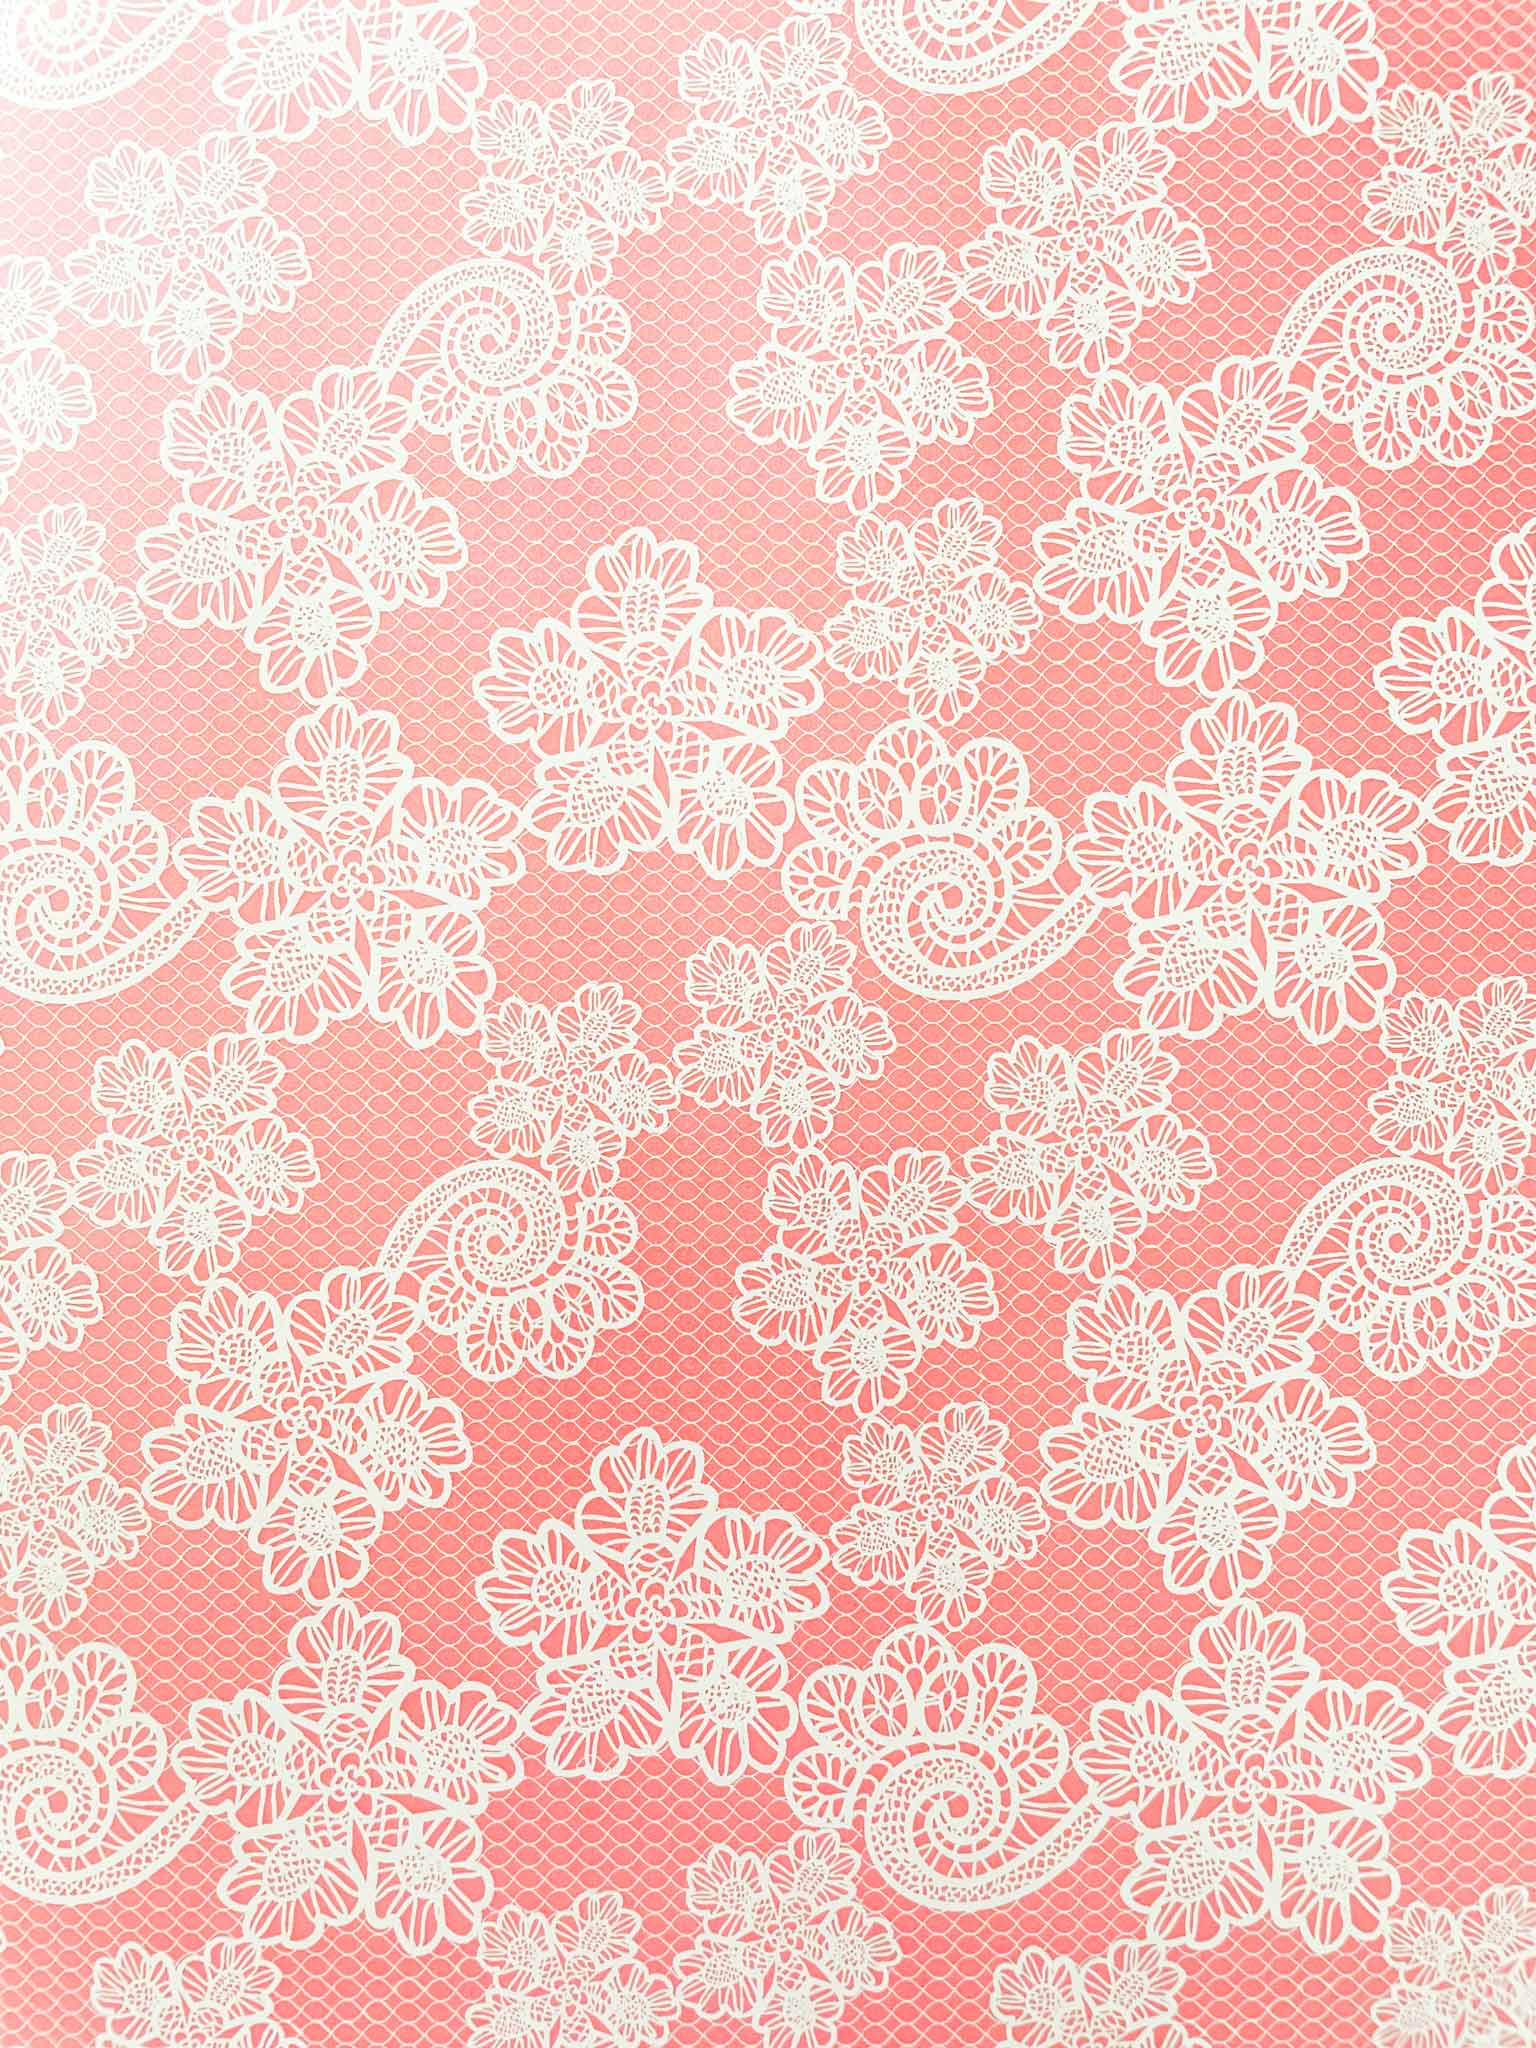 lace-pattern-craft-paper-in-pink-and-white